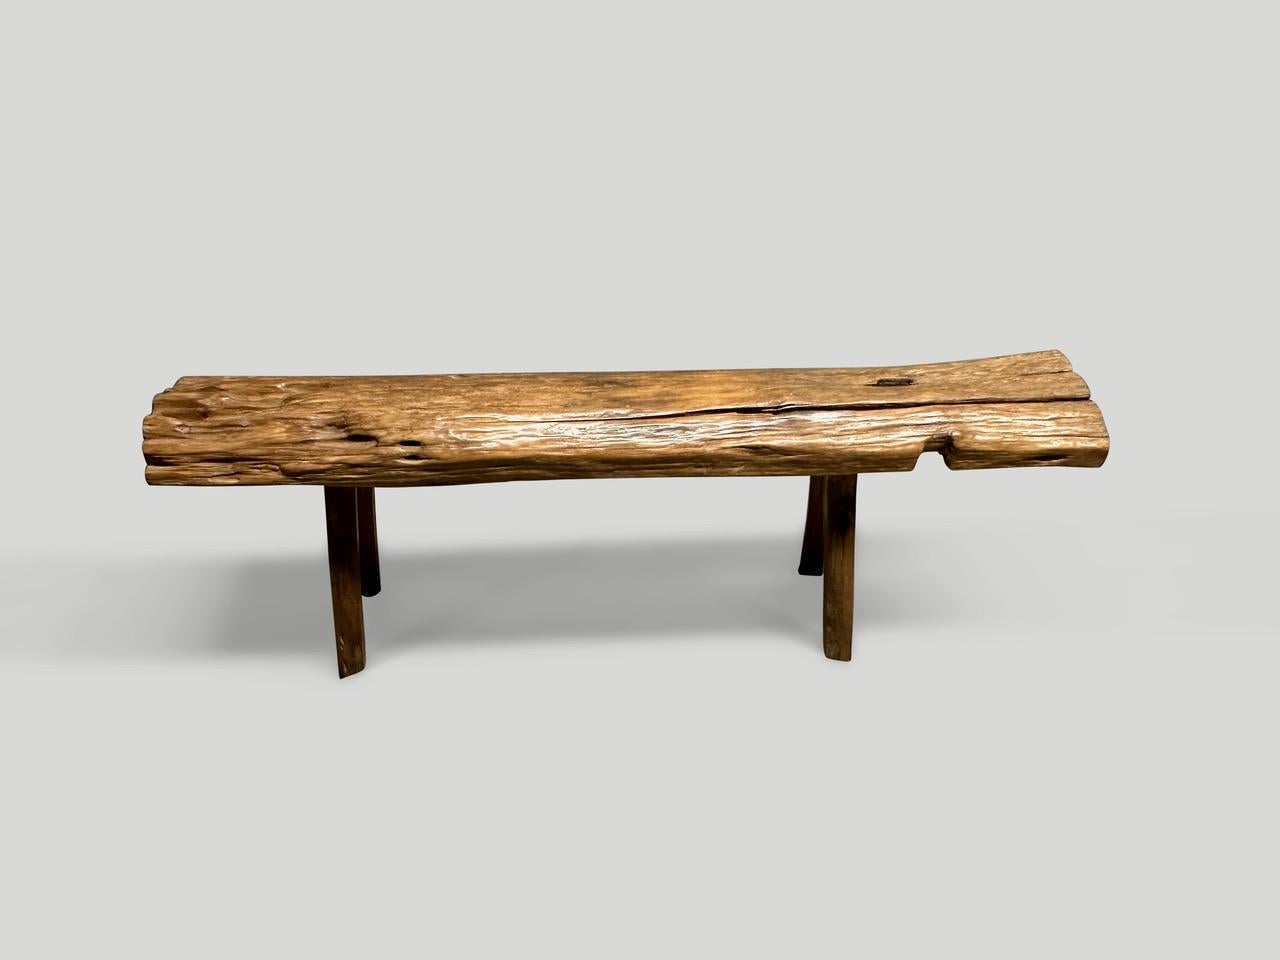 Andrianna Shamaris Antique Log Style Teak Wood Bench In Excellent Condition For Sale In New York, NY